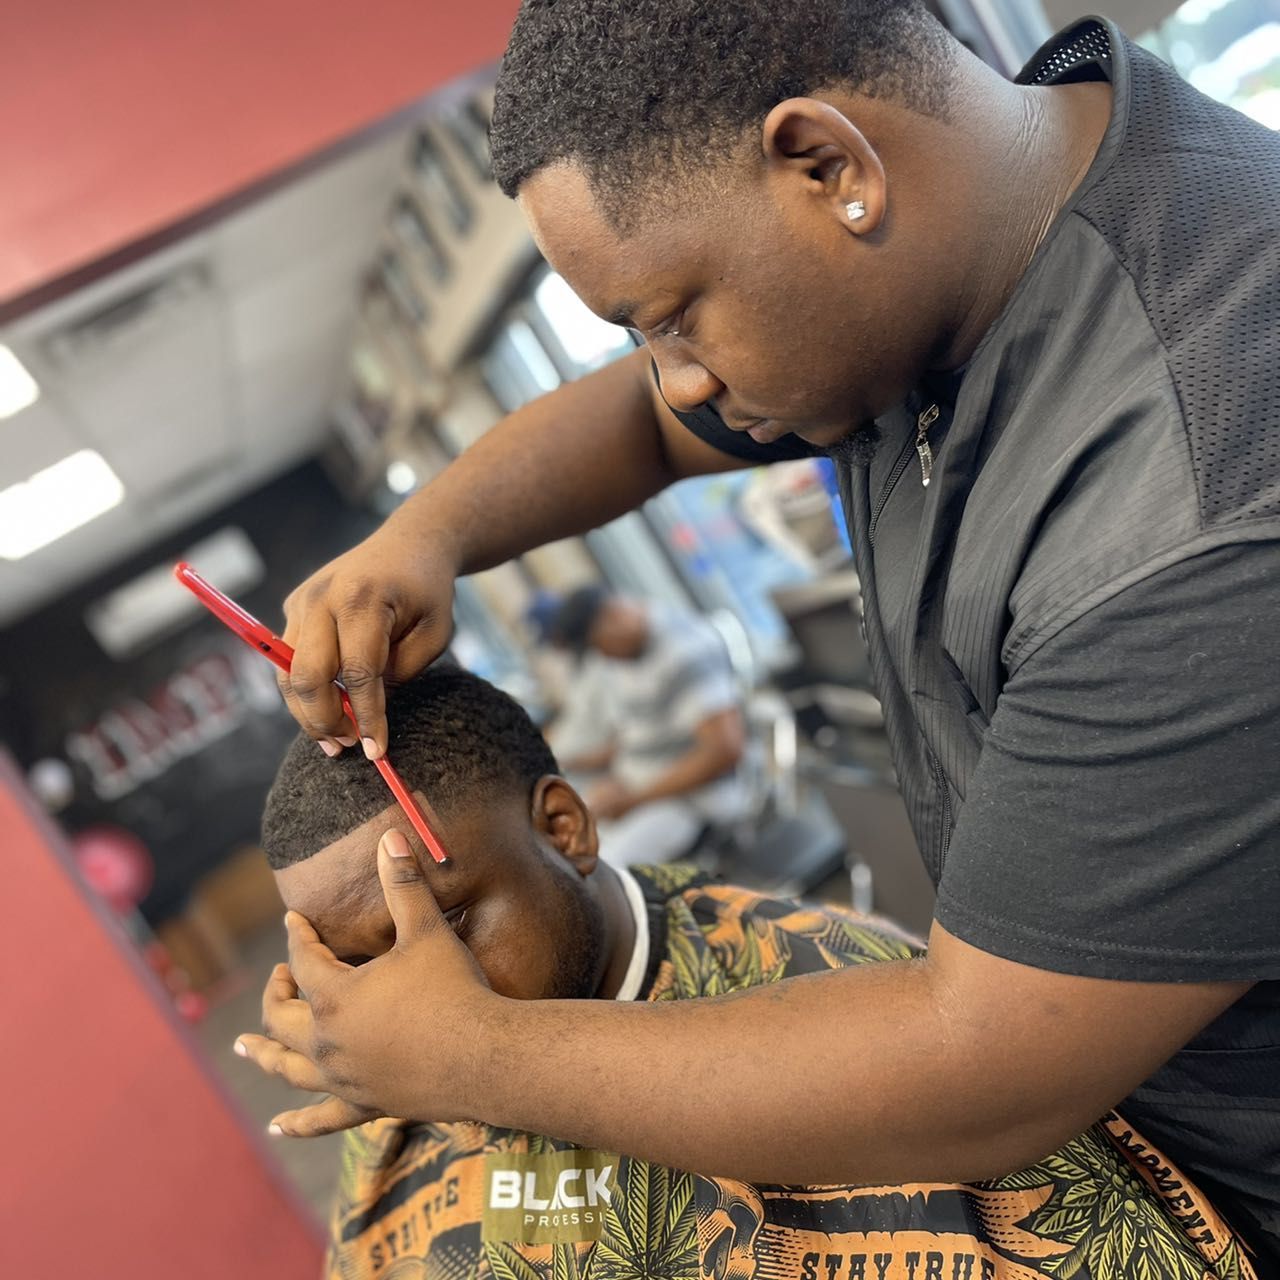 WATCH NOW: Barber goes from $5 fades in his grandma's Hammond